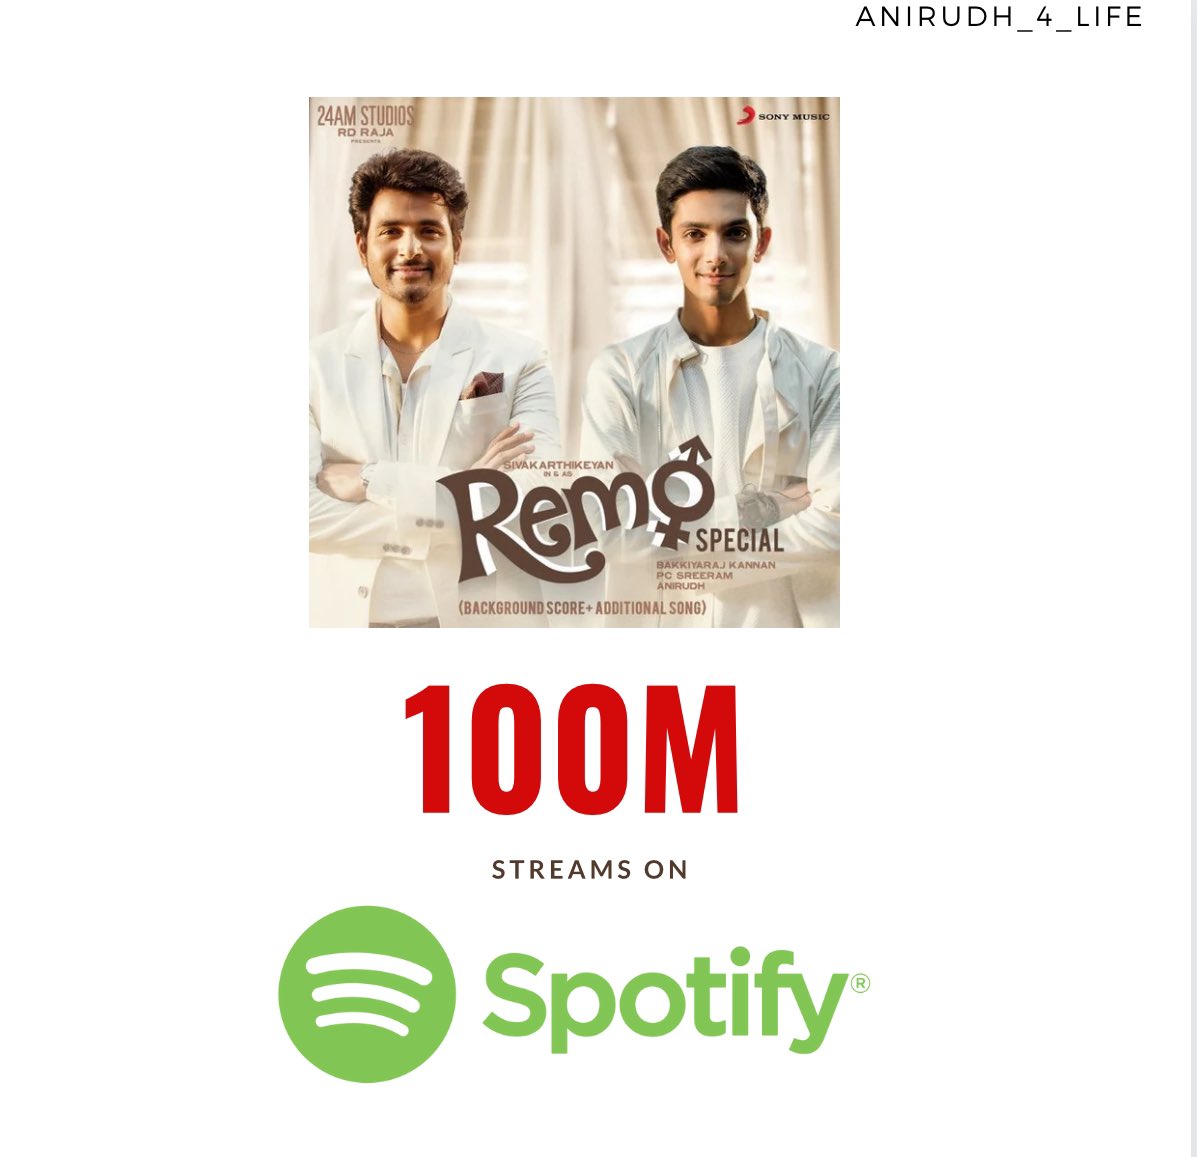 100M streams for #Remo album on Spotify!💥 @anirudhofficial